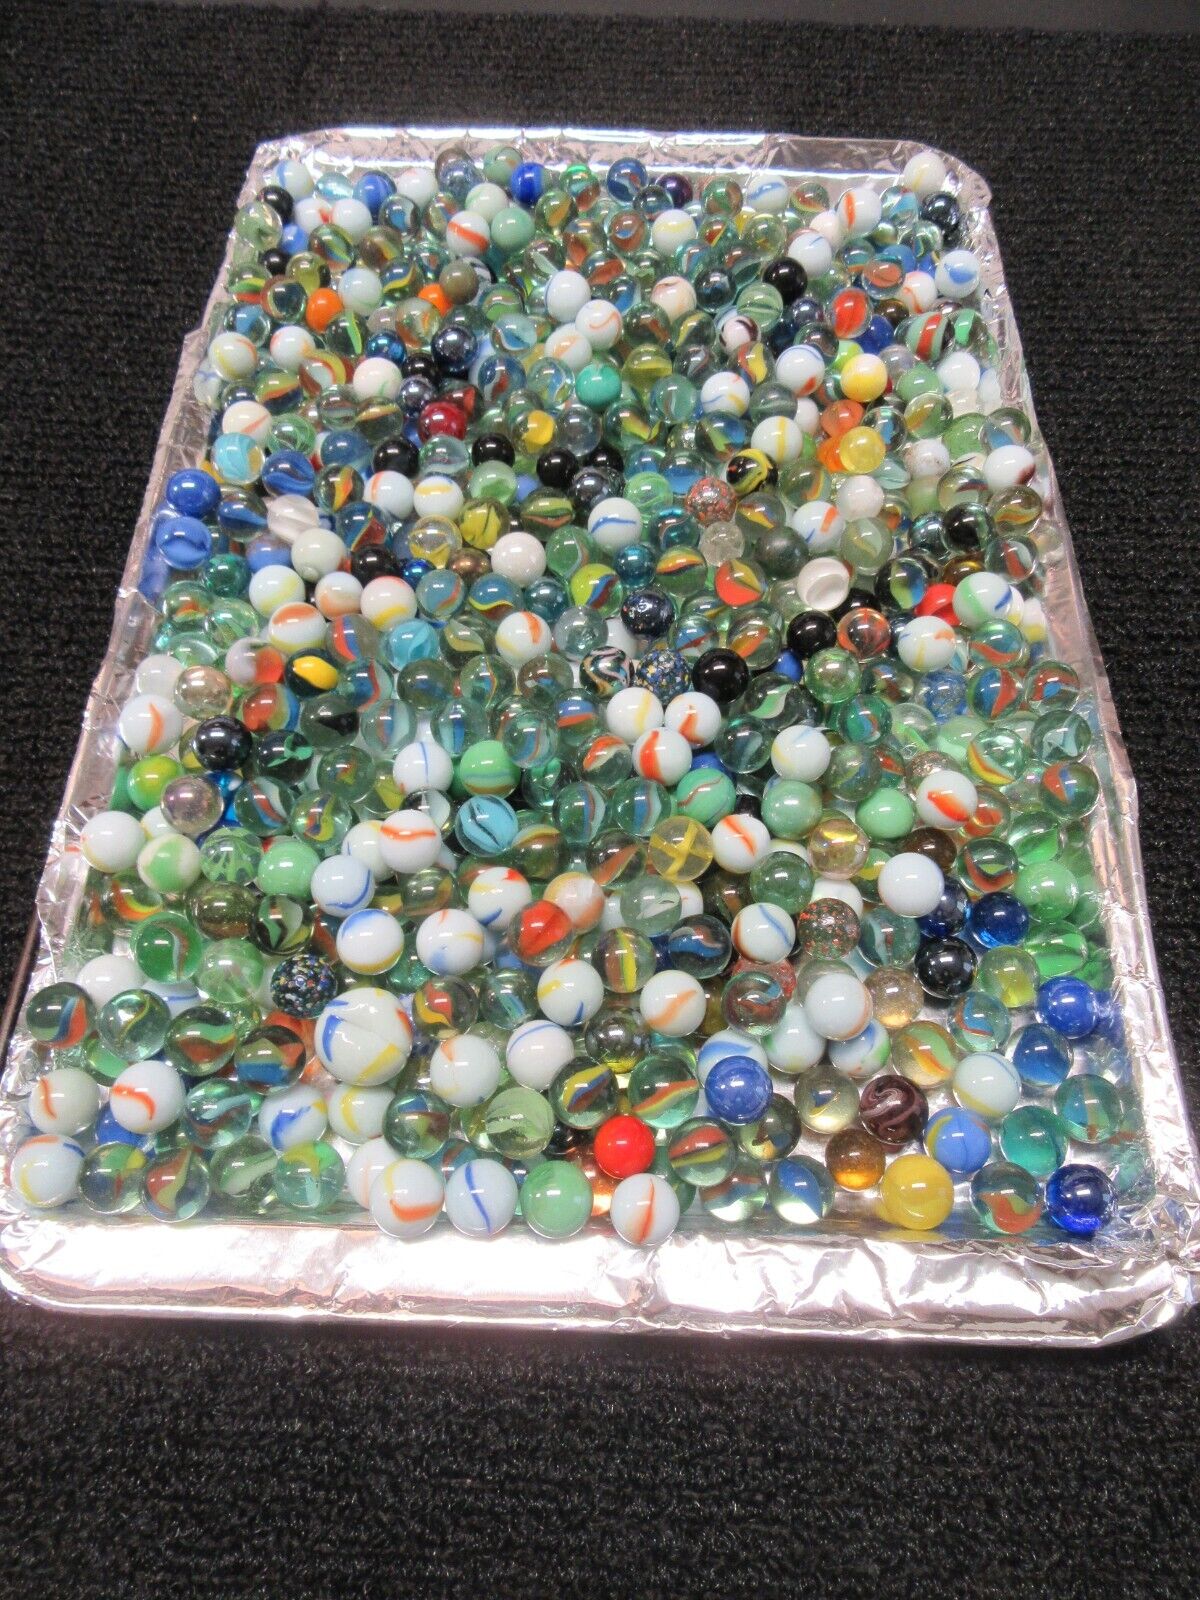 26 Vintage To Modern Marbles From The Pictured Group!! See Pics! Free Shipping!! Unbranded